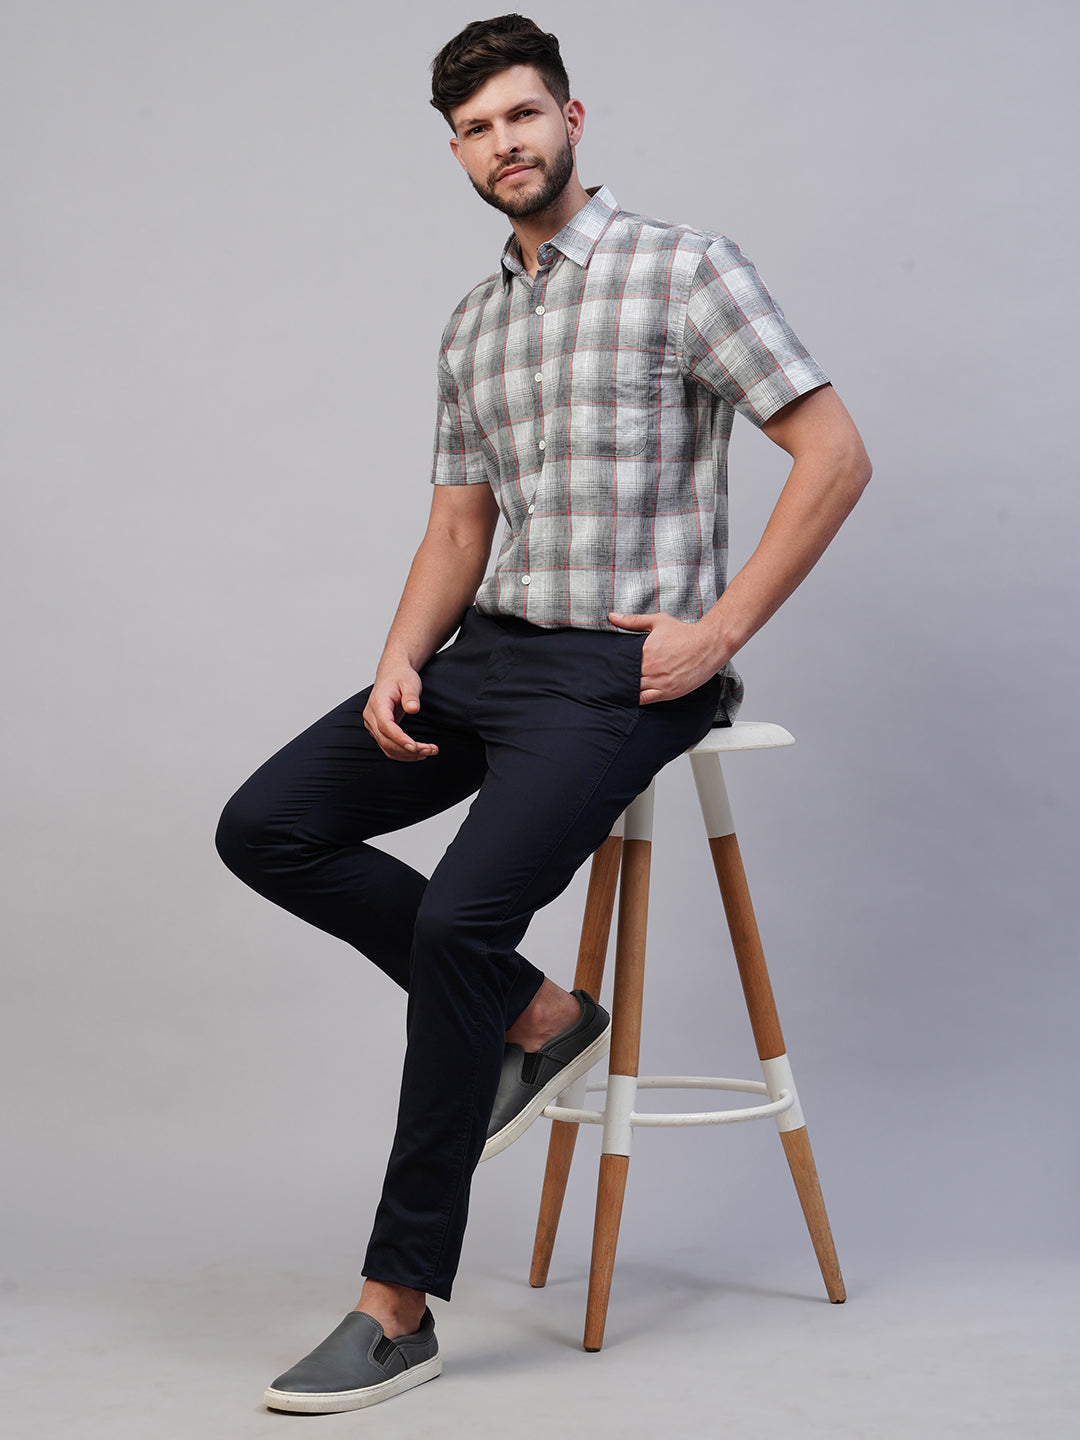 Shirt and Trousers Combination  Shirts  Pants Combinations